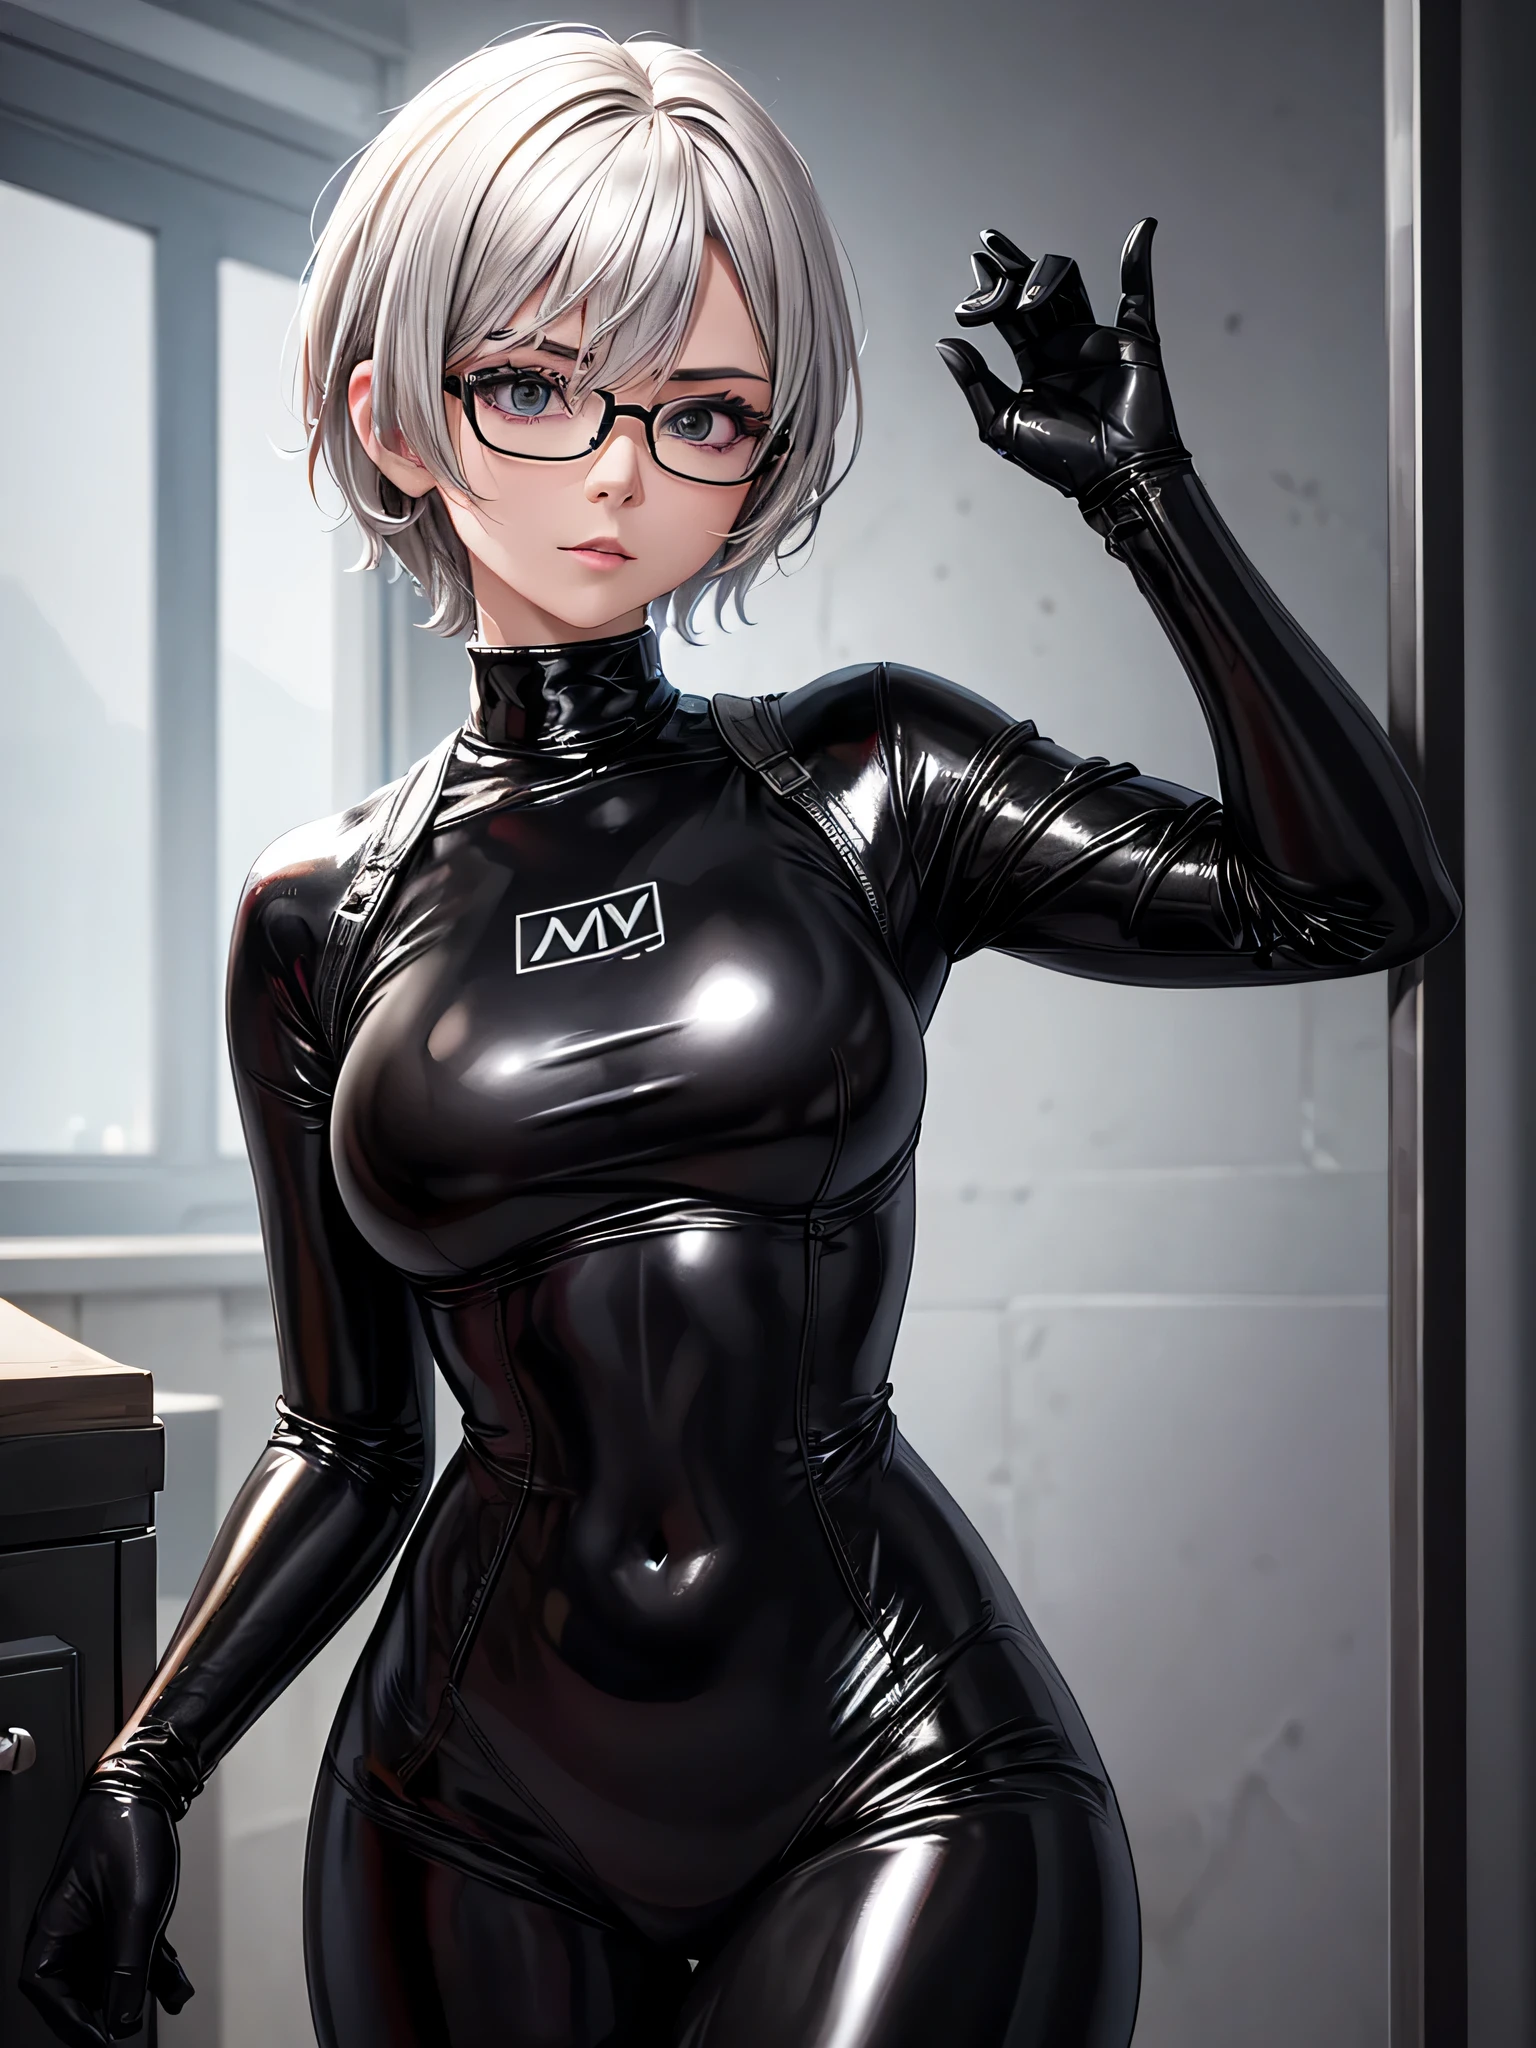 Top quality 8K UHD、Wearing glasses、Beautiful woman with short silver hair wearing a black metallic latex sweatsuit with her hands tied behind her back.、black metallic latex sweatsuit with hidden skin